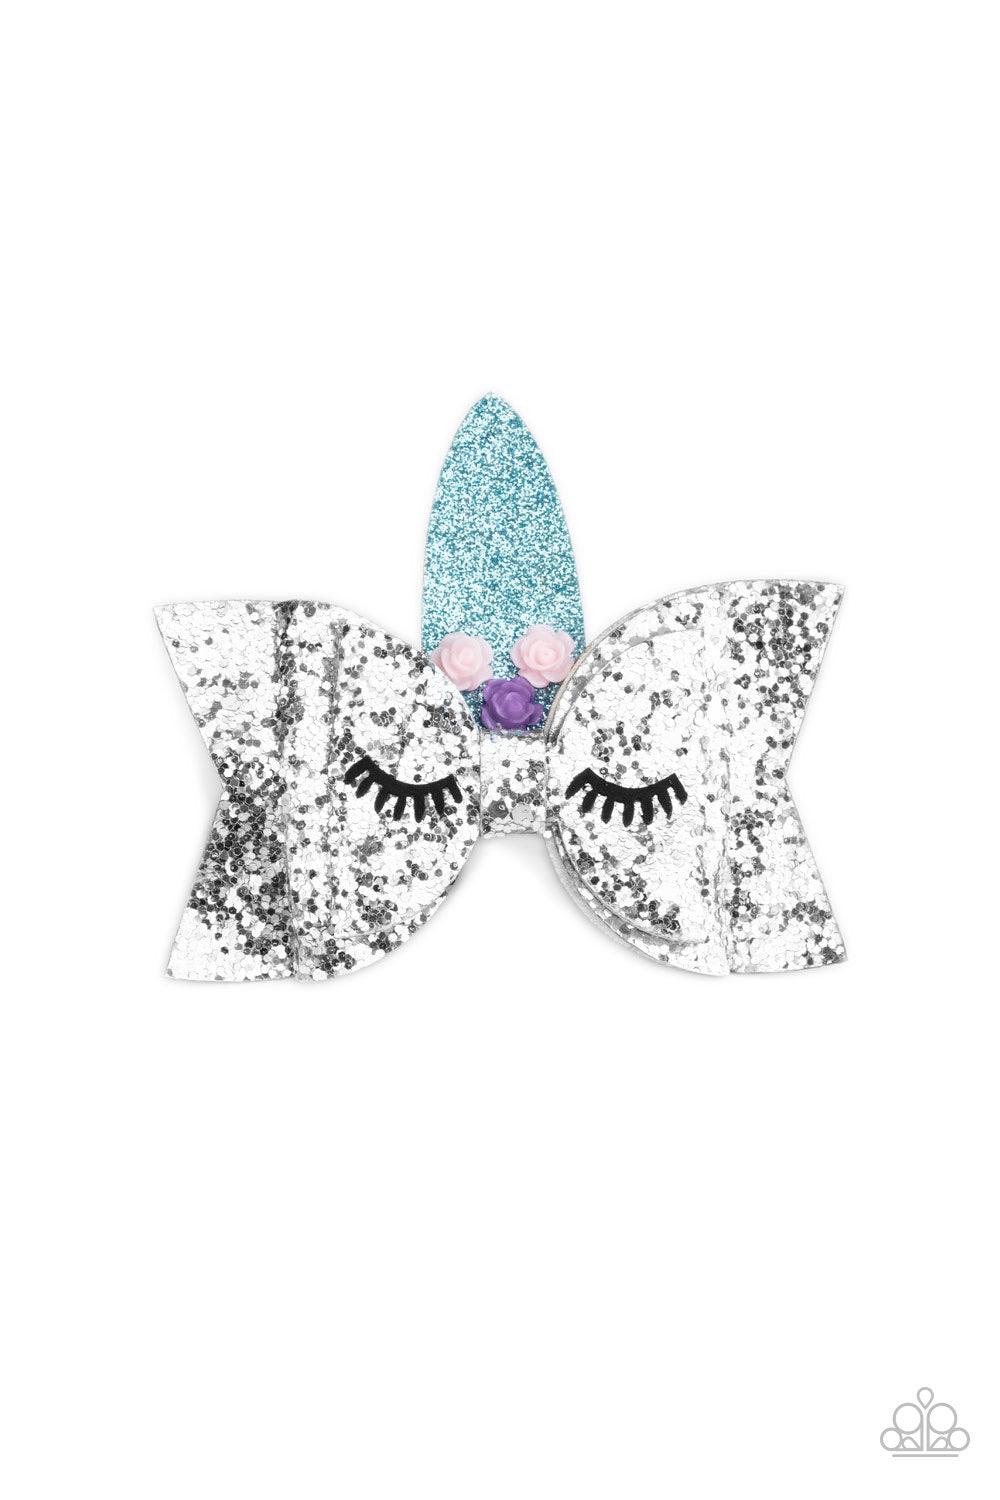 Paparazzi Accessories Just Be A YOU-nicorn - Silver Decorated in pink and purple resin roses, a sparkling blue horn crowns a glittery silver hair bow featuring suede eyelashes, creating an adorable unicorn. Features a standard hair clip on the back. Sold